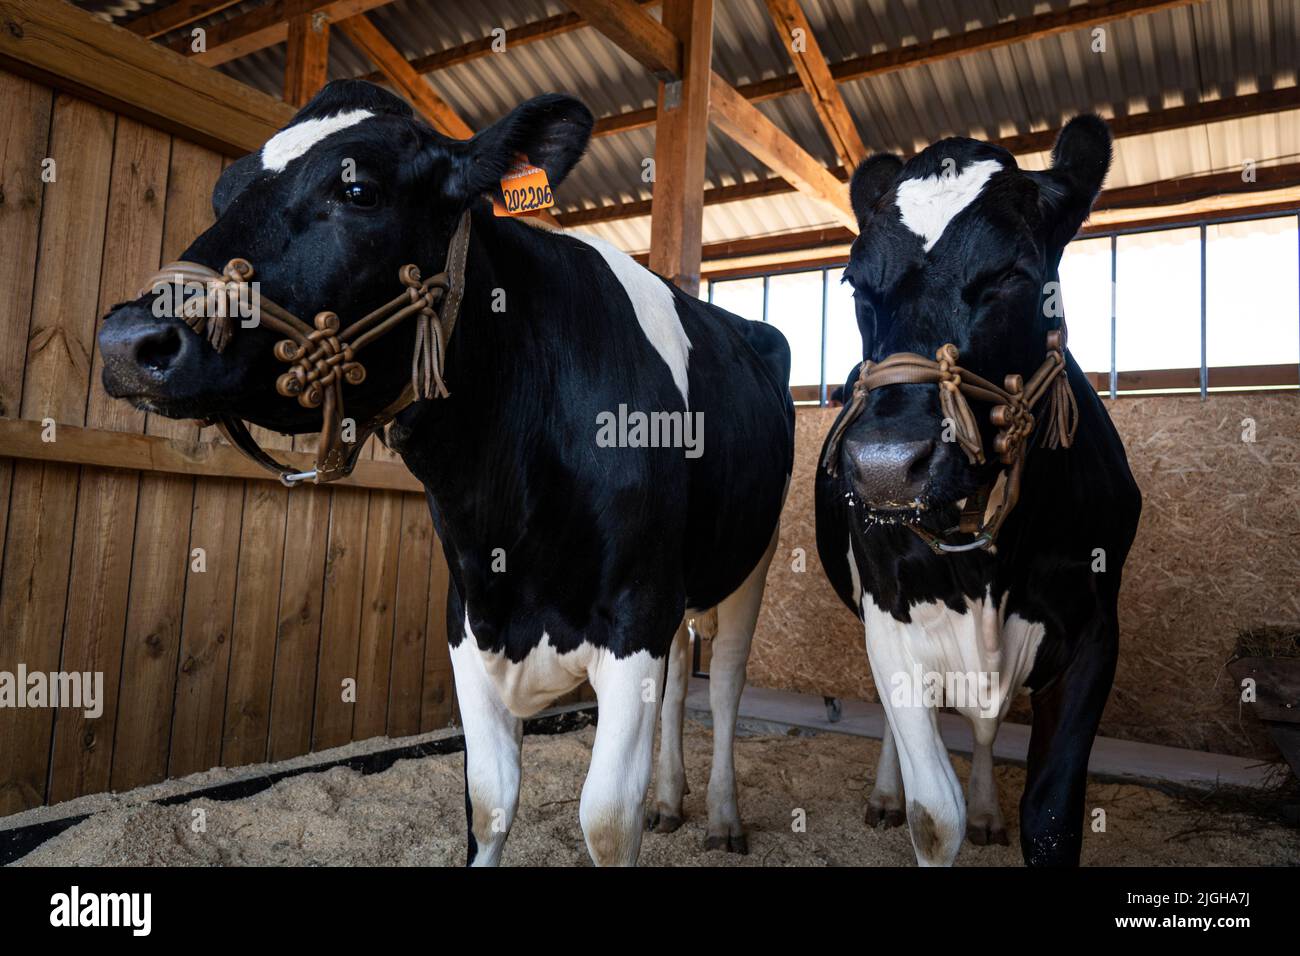 A cow and calf are standing in a cage. Cattle breeding. Bulls in a cattle pen. Stock Photo